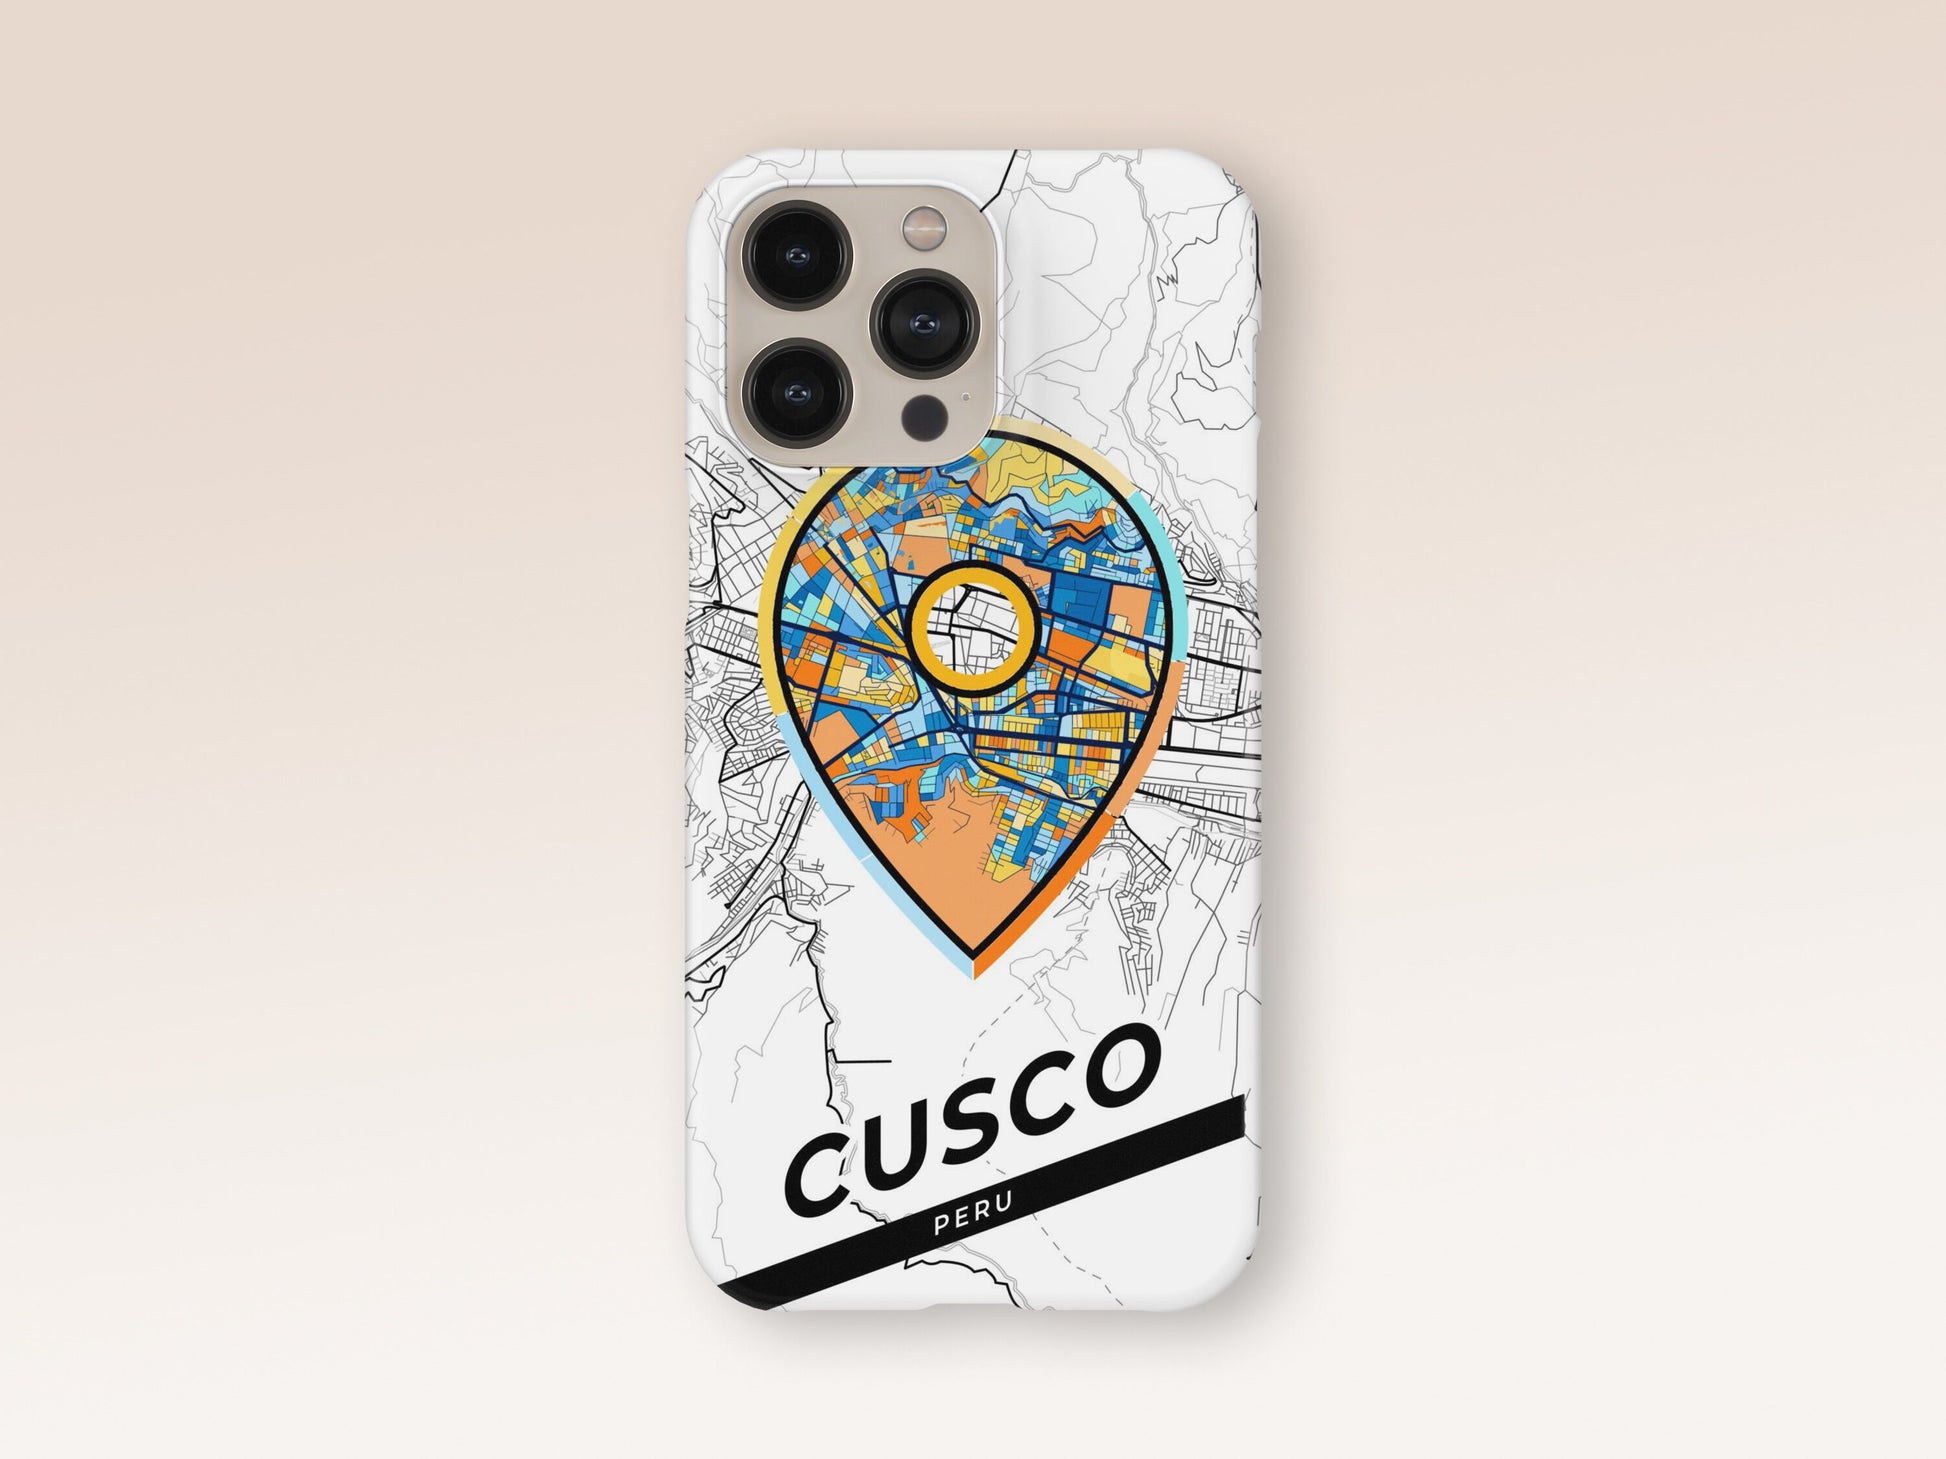 Cusco Peru slim phone case with colorful icon. Birthday, wedding or housewarming gift. Couple match cases. 1